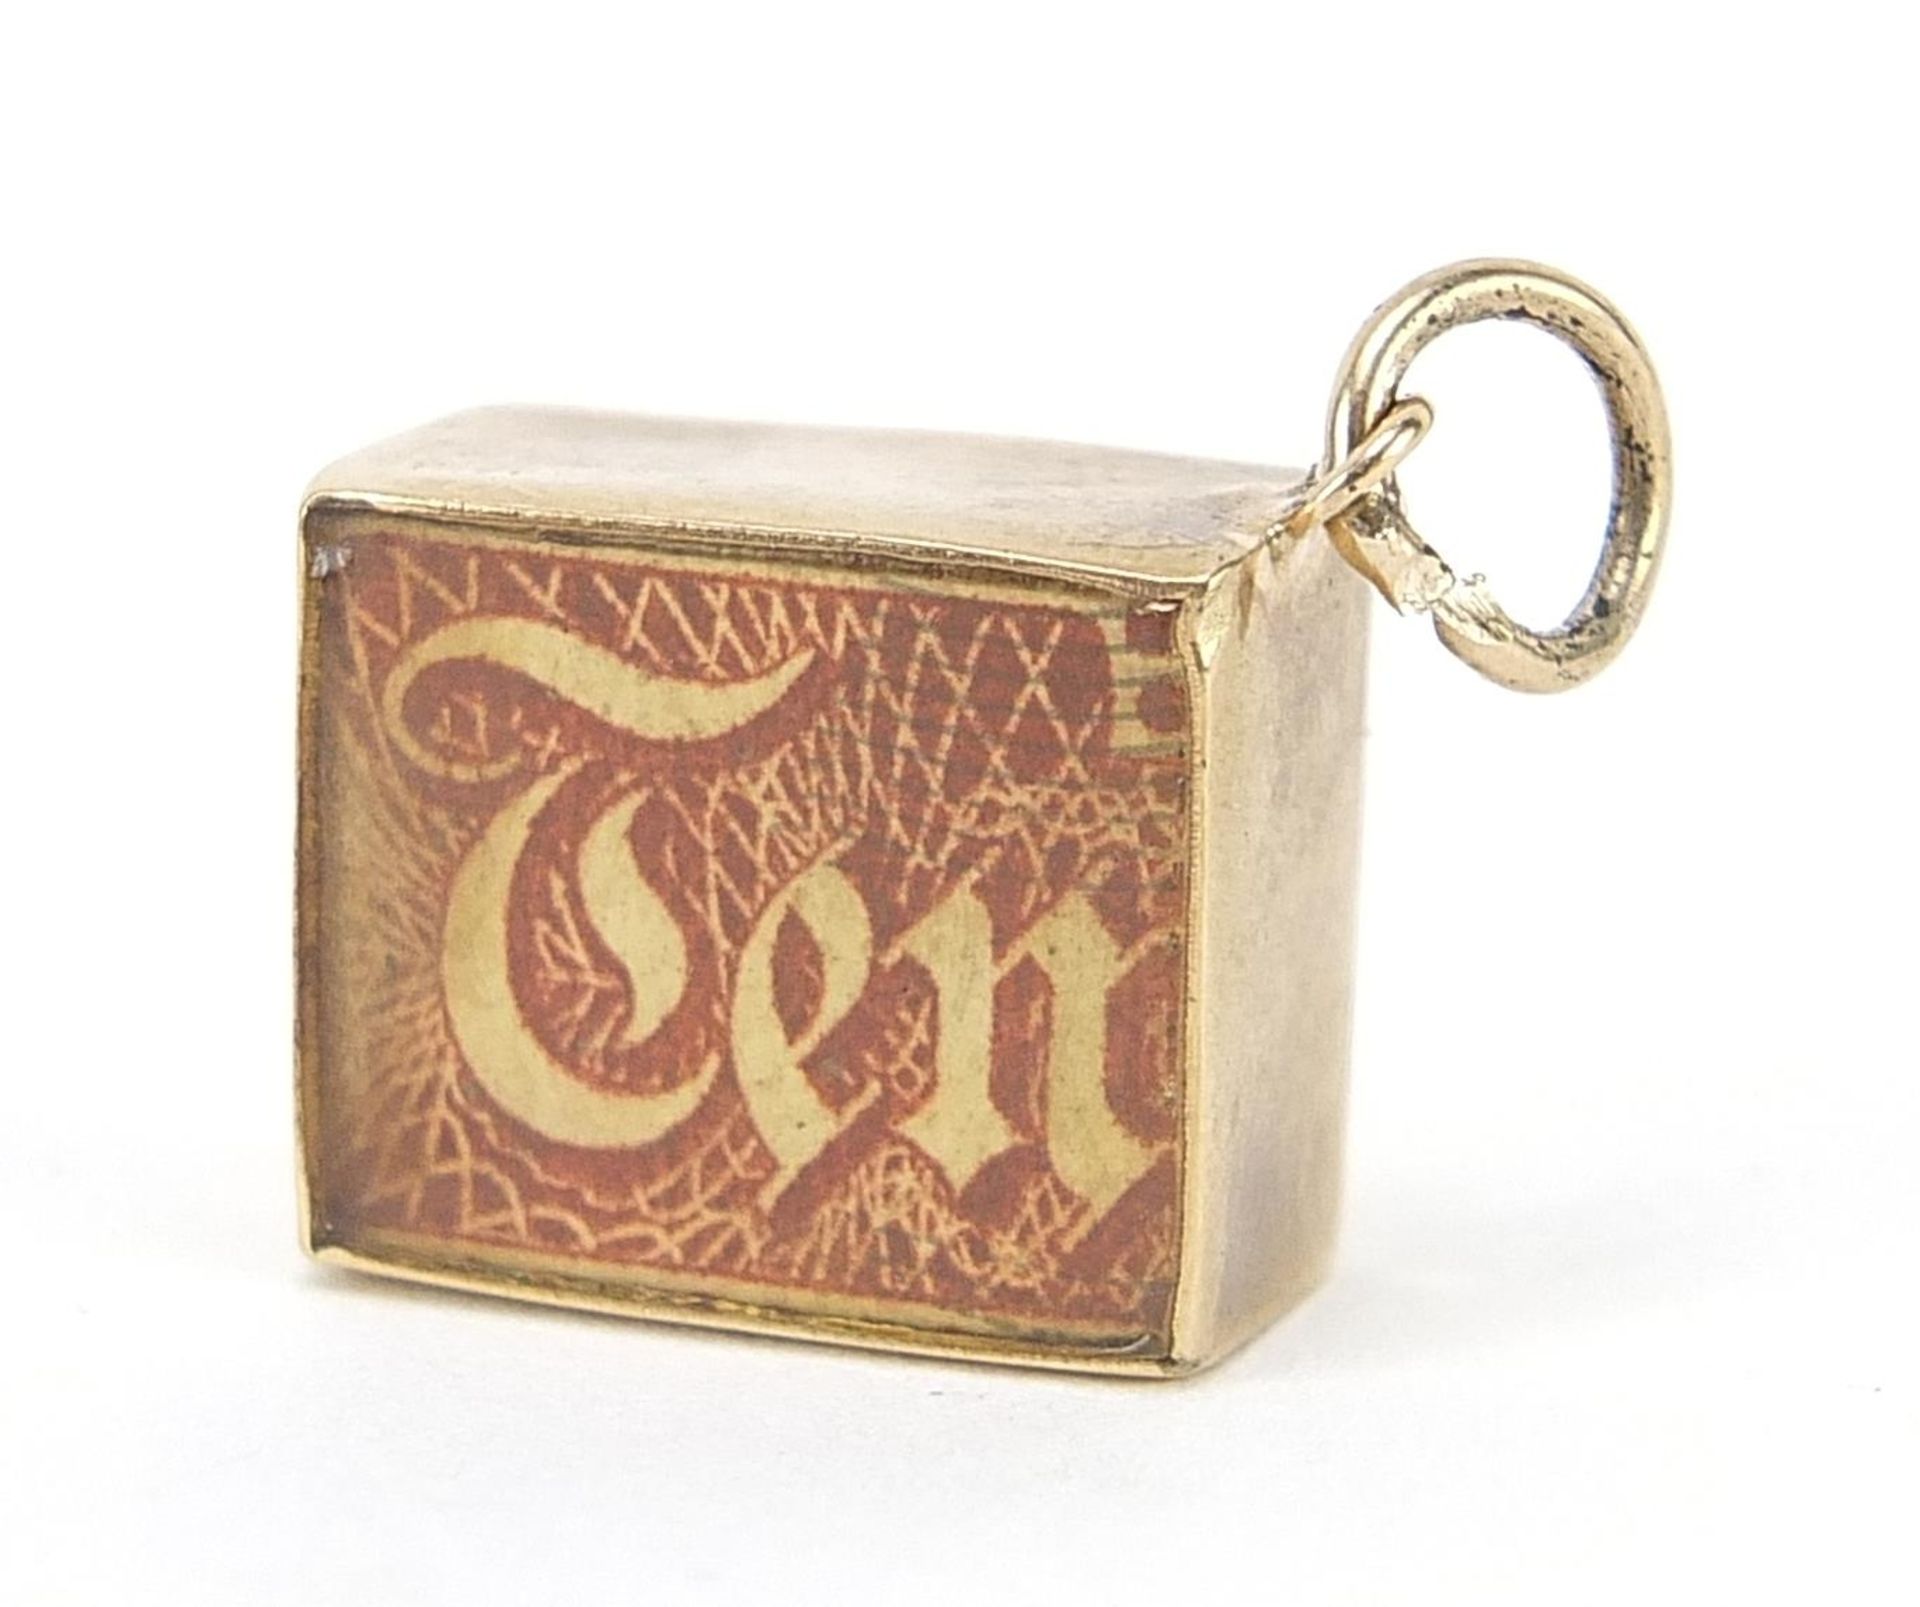 9ct gold emergency ten shilling note charm, 1.3cm wide, 2.2g : For further information on this lot